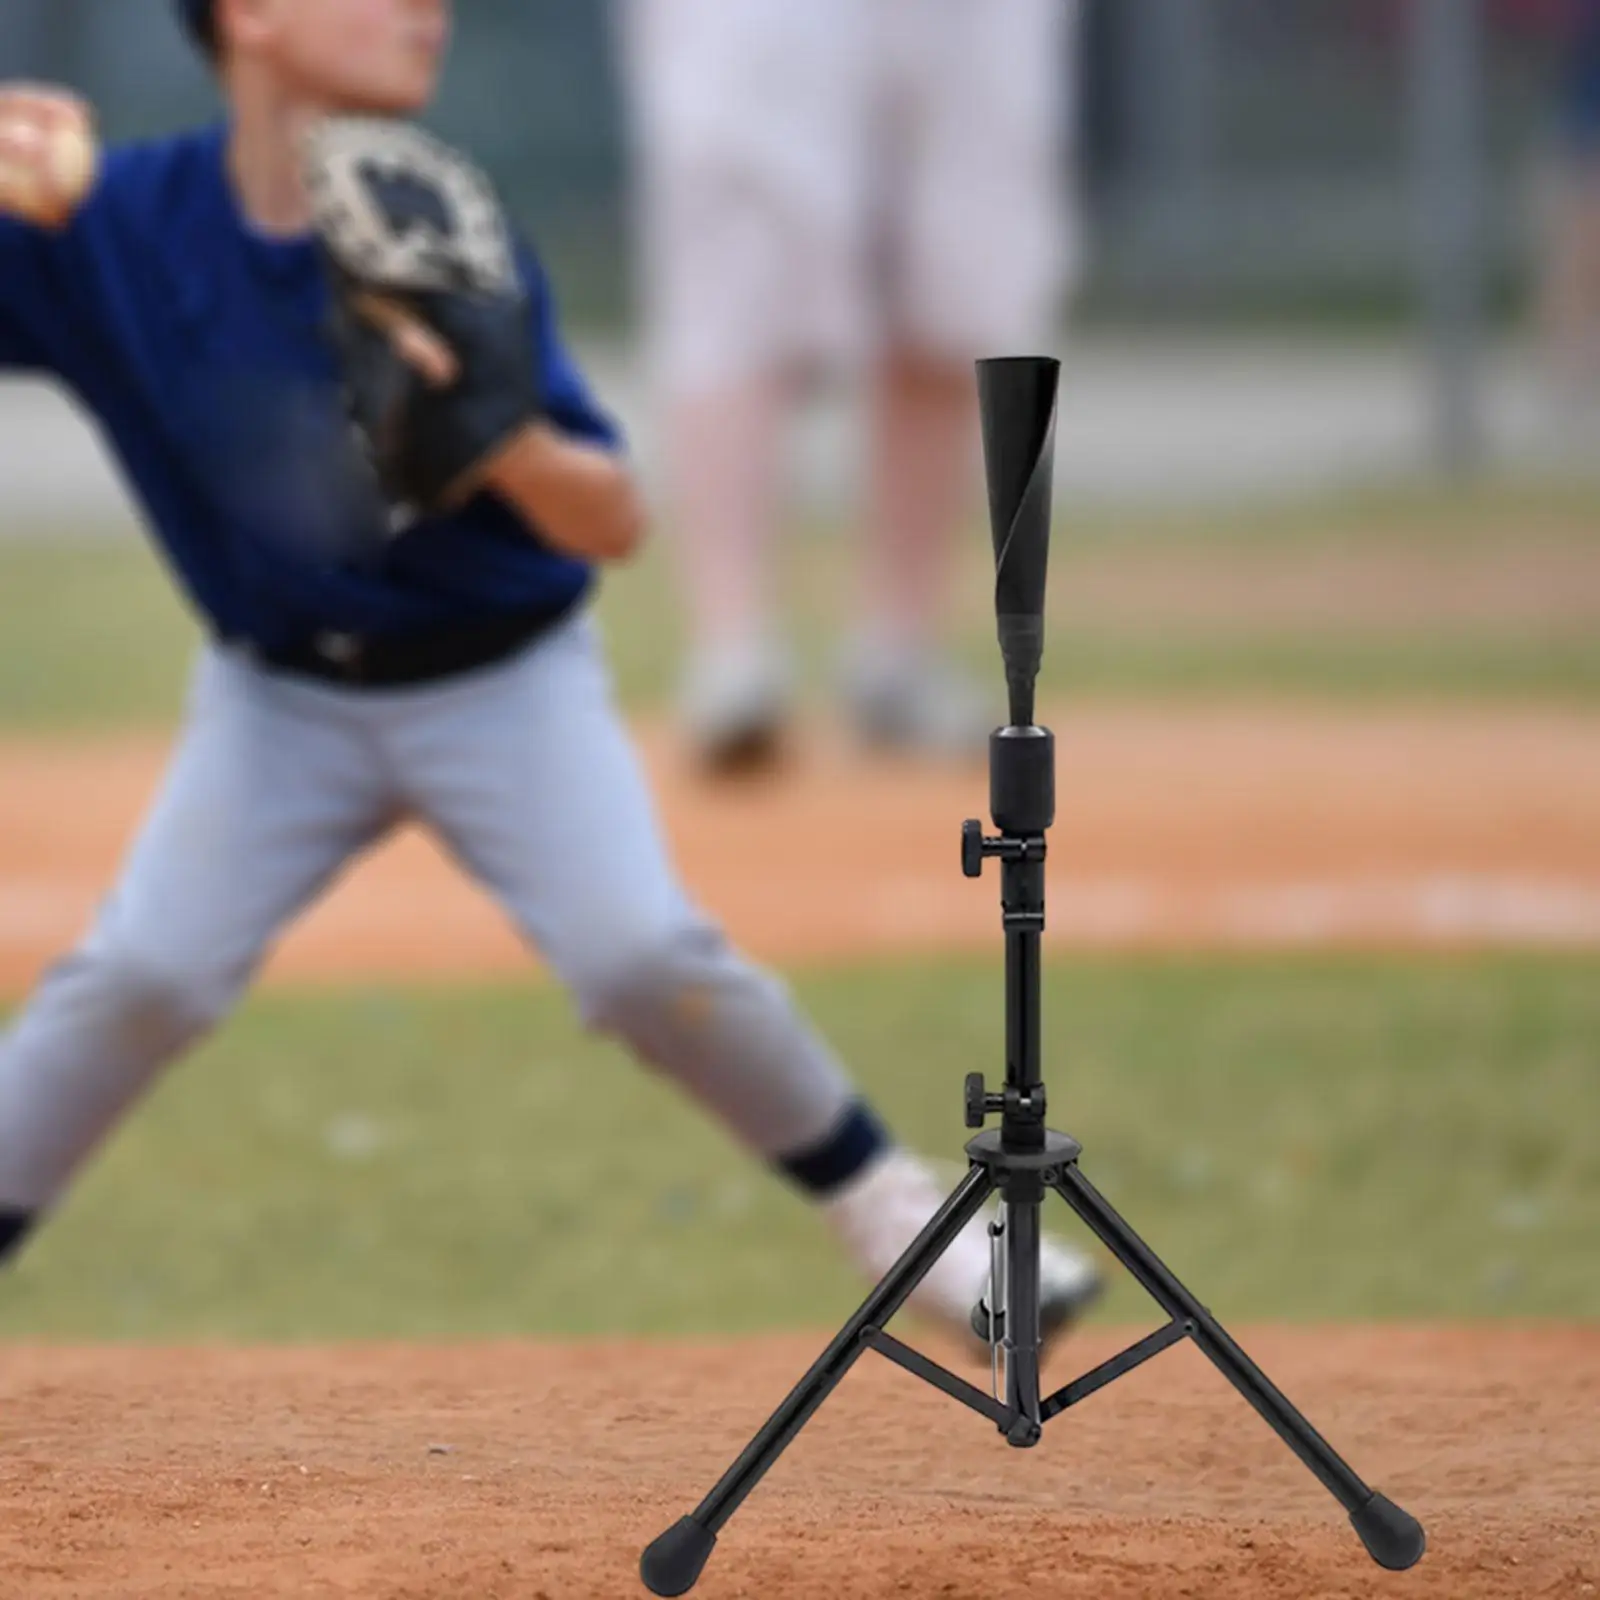 Baseball Batting Tee Professional Adjustable Height 27 to 41 Inches Portable Hitting Tee Stand for Adults Pitching Balls